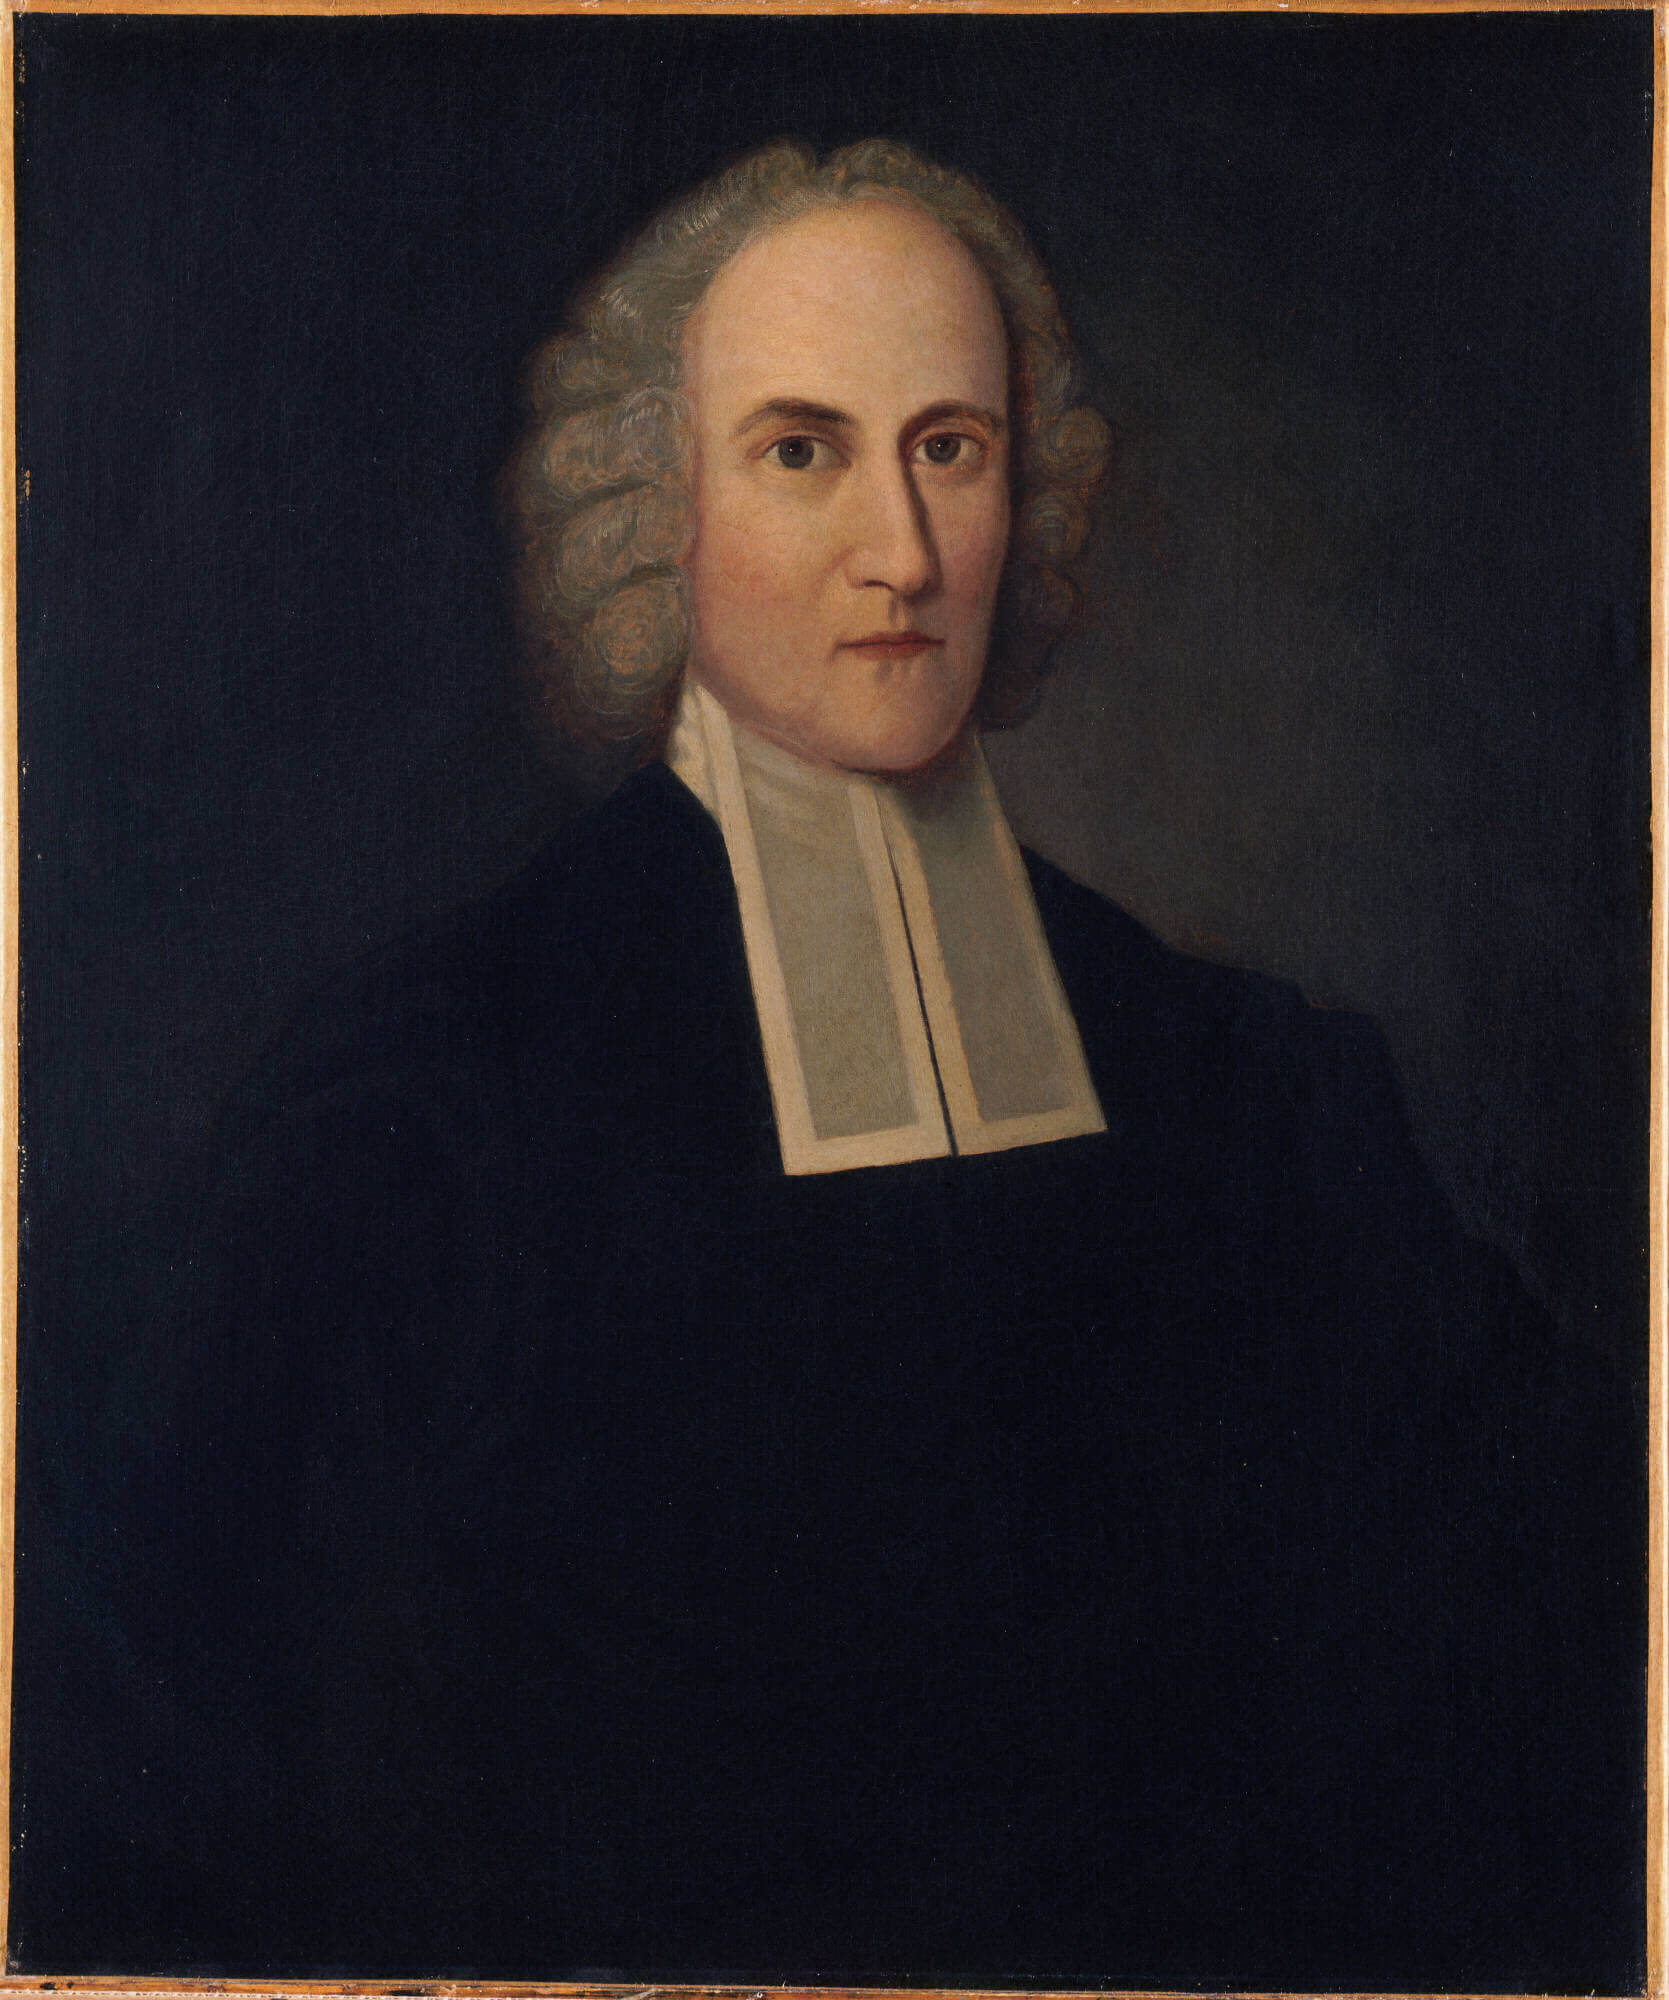 Learn about minister Jonathan Edwards